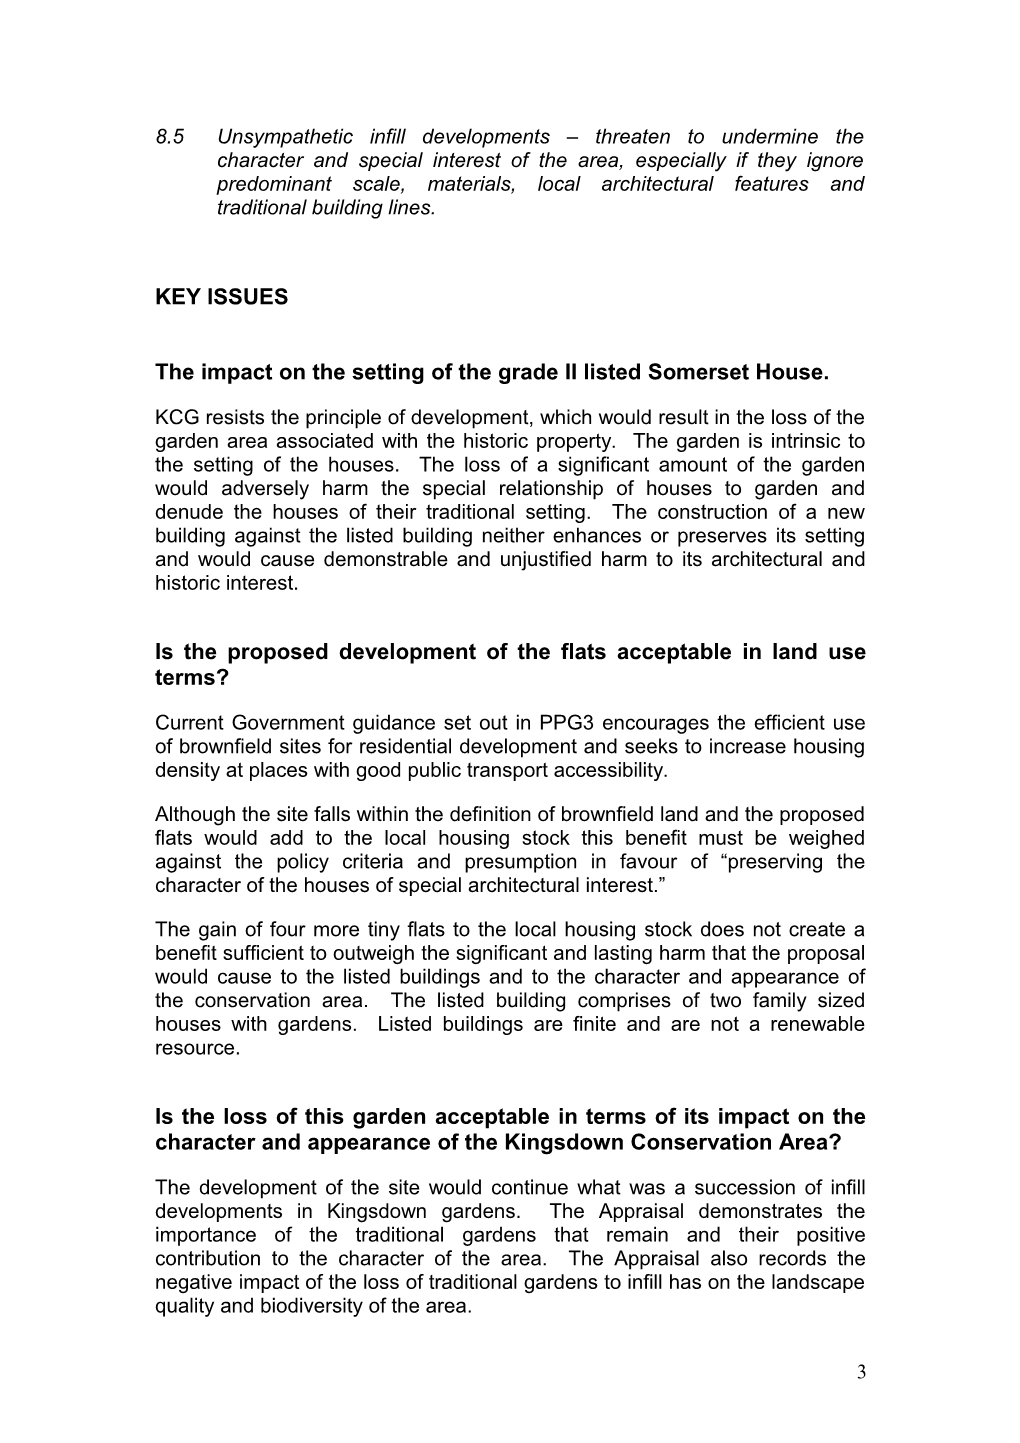 The Response of Kingsdown Conservation Group to the Proposed De